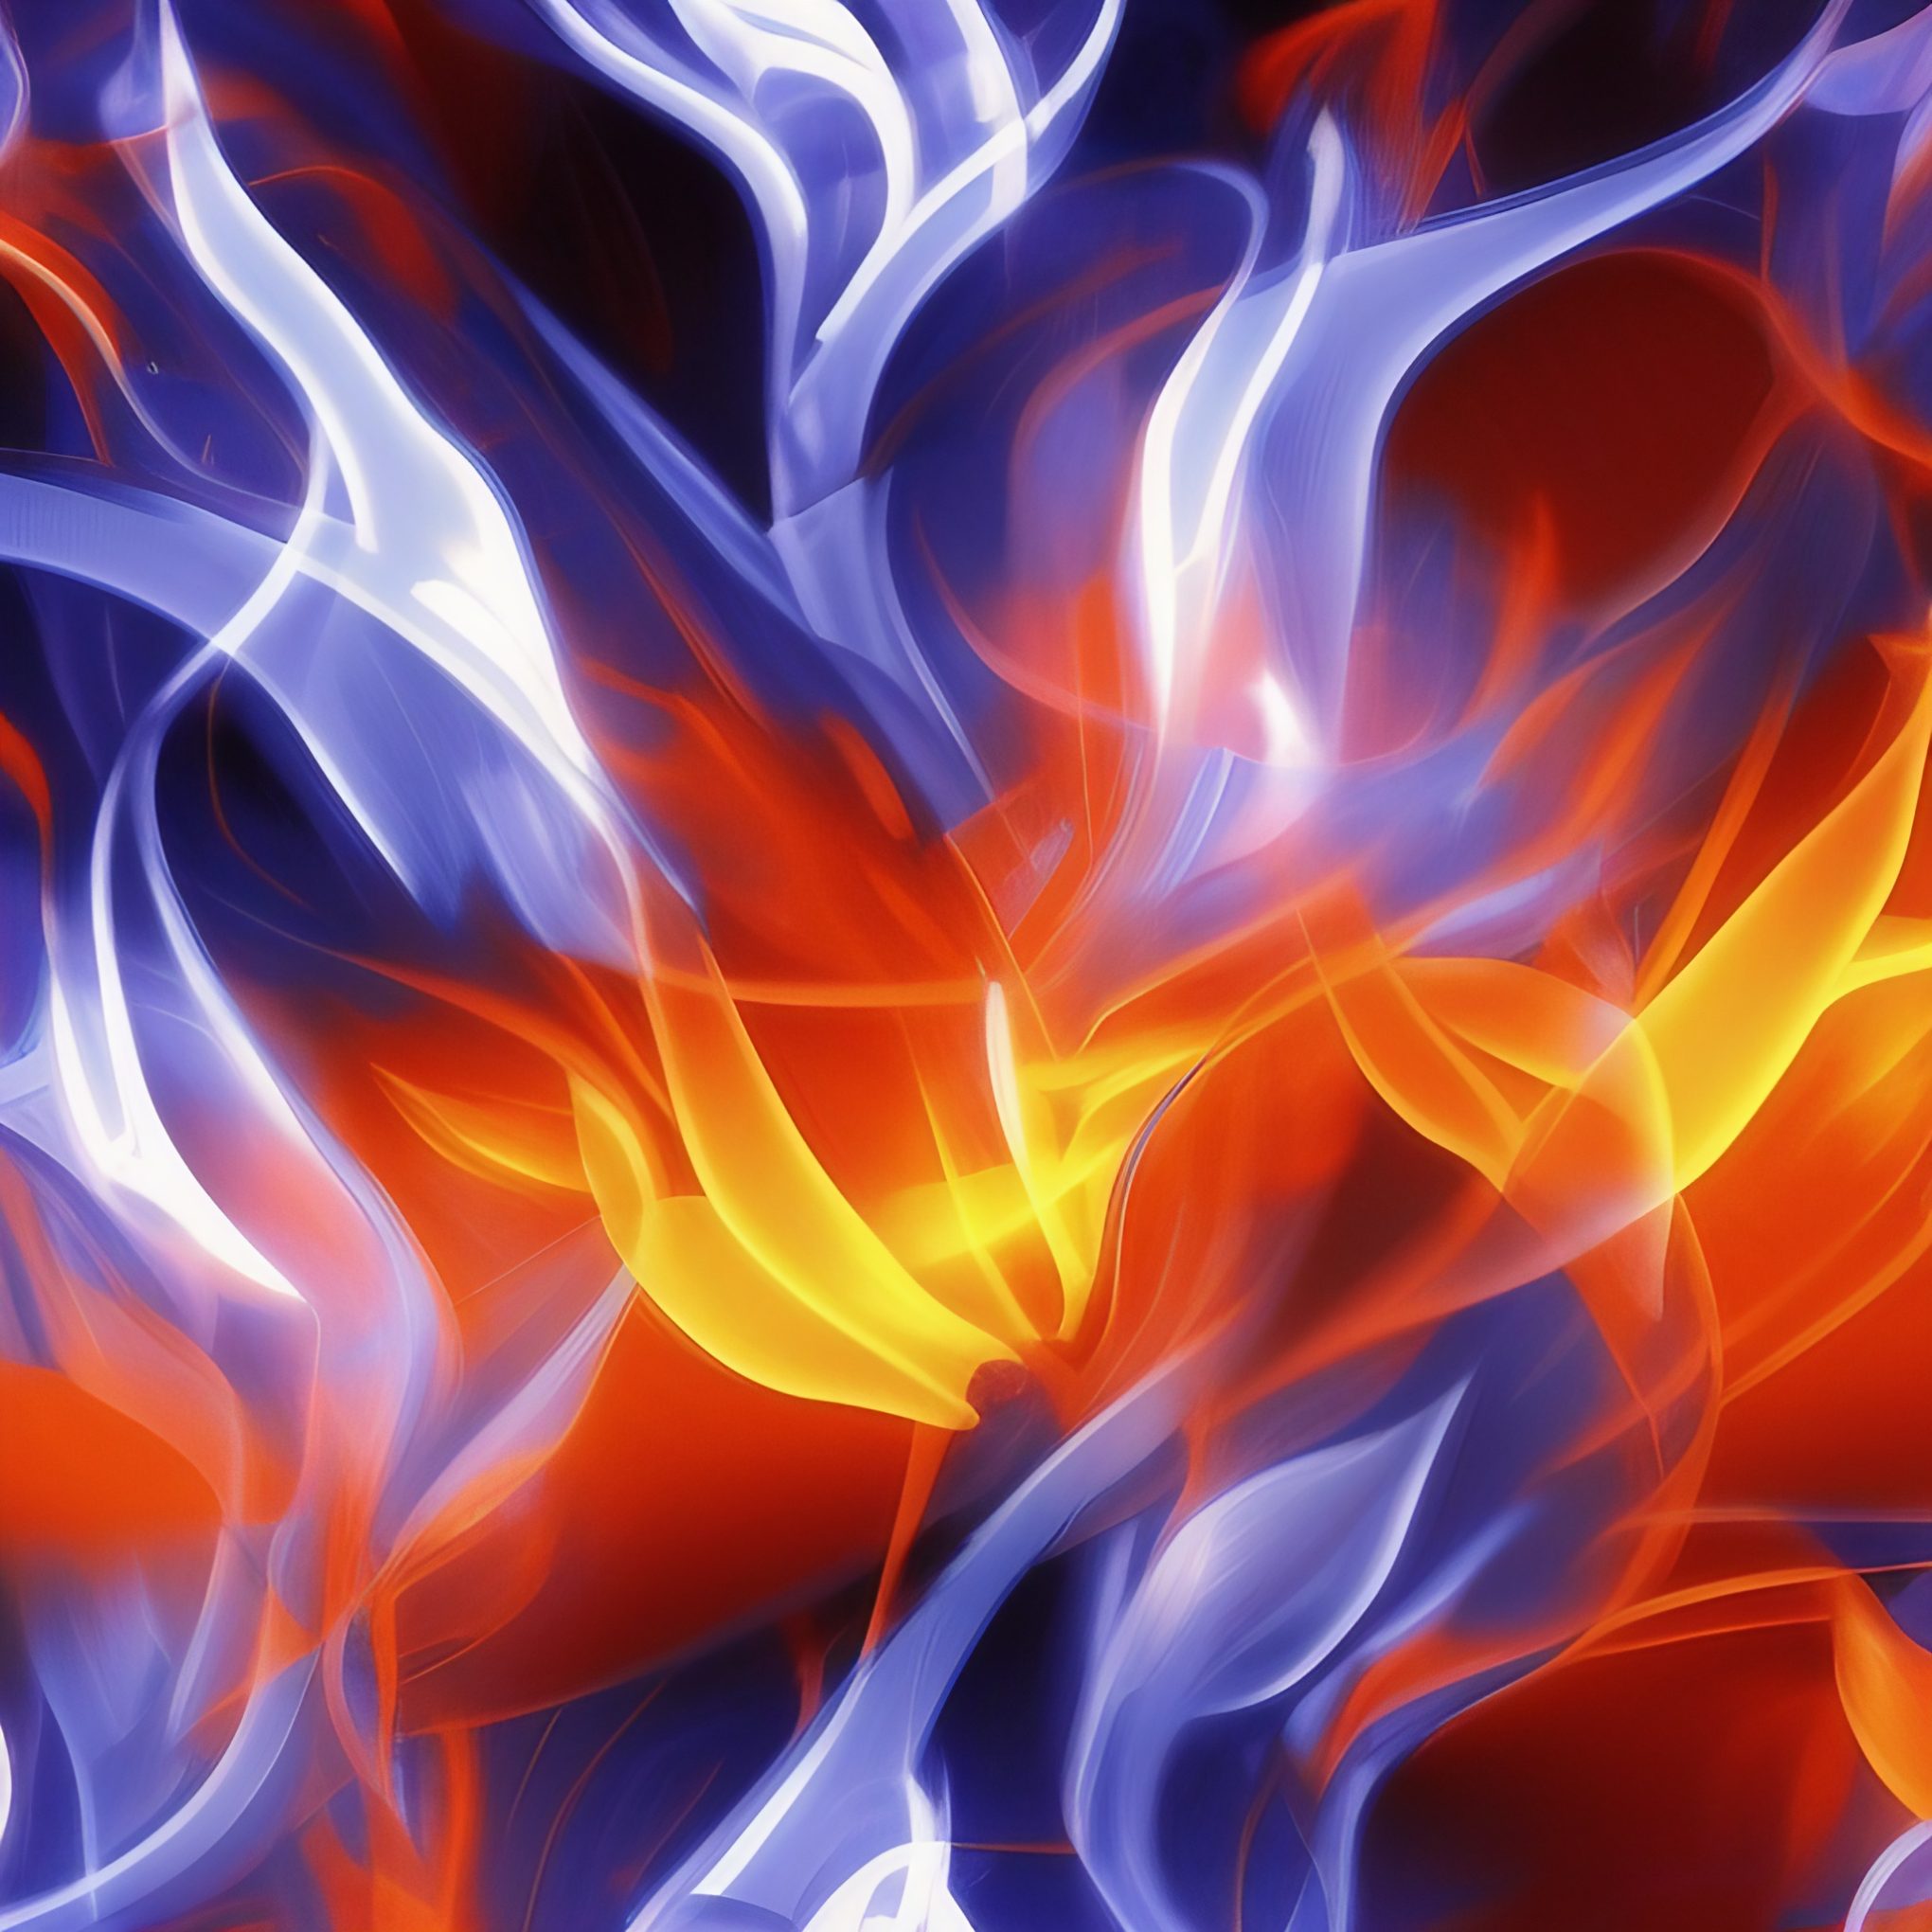 Abstract Orange and Blue Flames